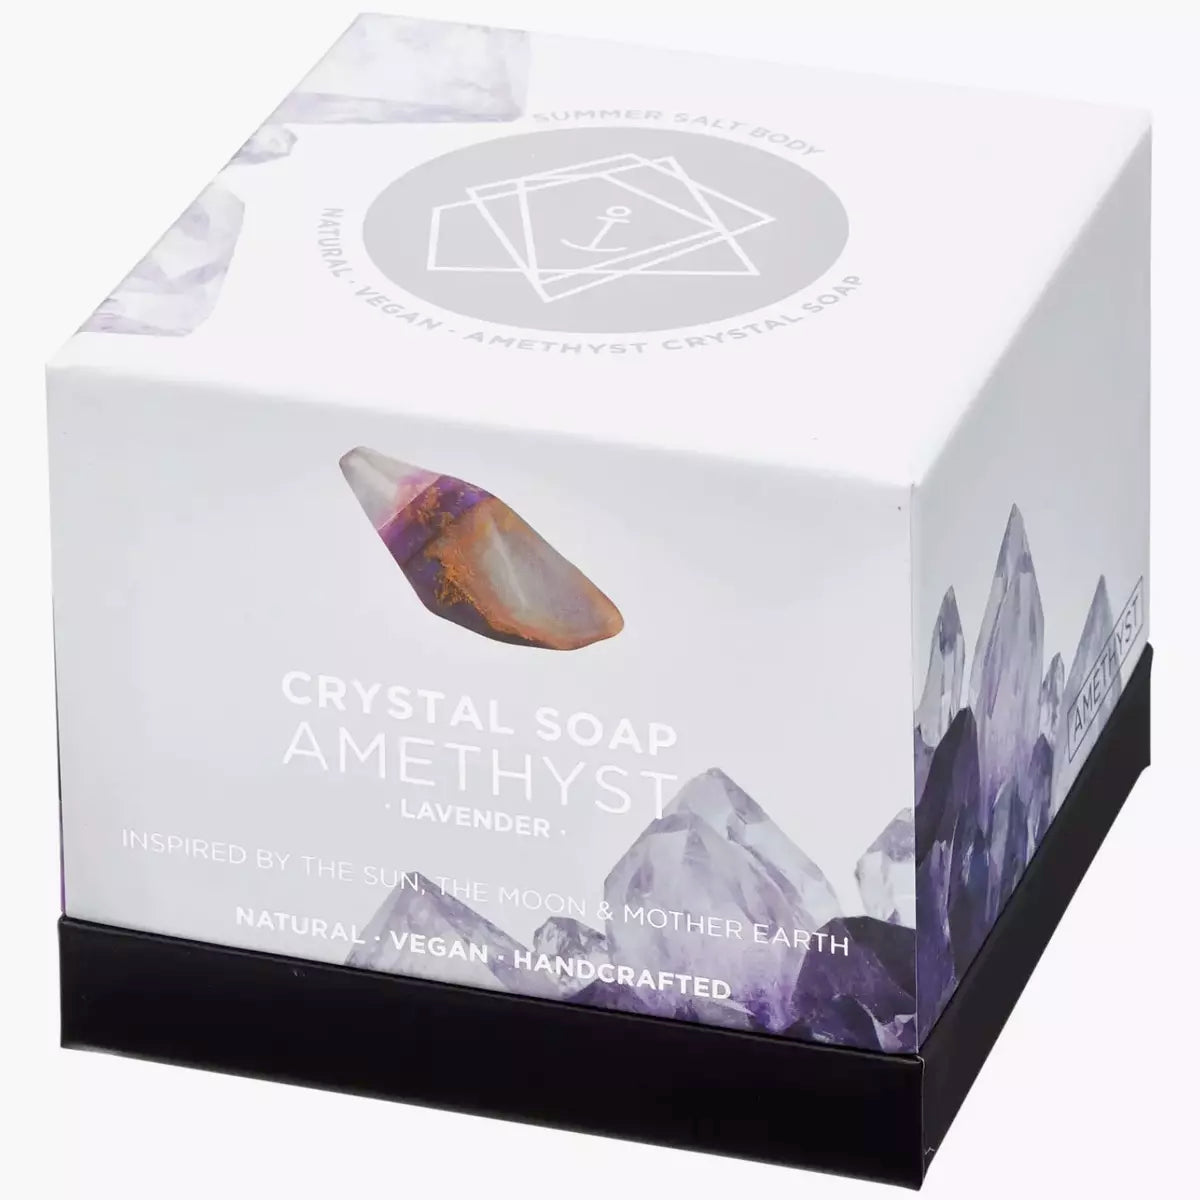 Summer Salt Body's Crystal Soap - AMETHYST - Lavender is a unique cleansing product infused with the powerful energies of Amethyst Crystal. This ethereal soap not only cleanses your skin but also helps to dispel negative energy, promoting a sense of